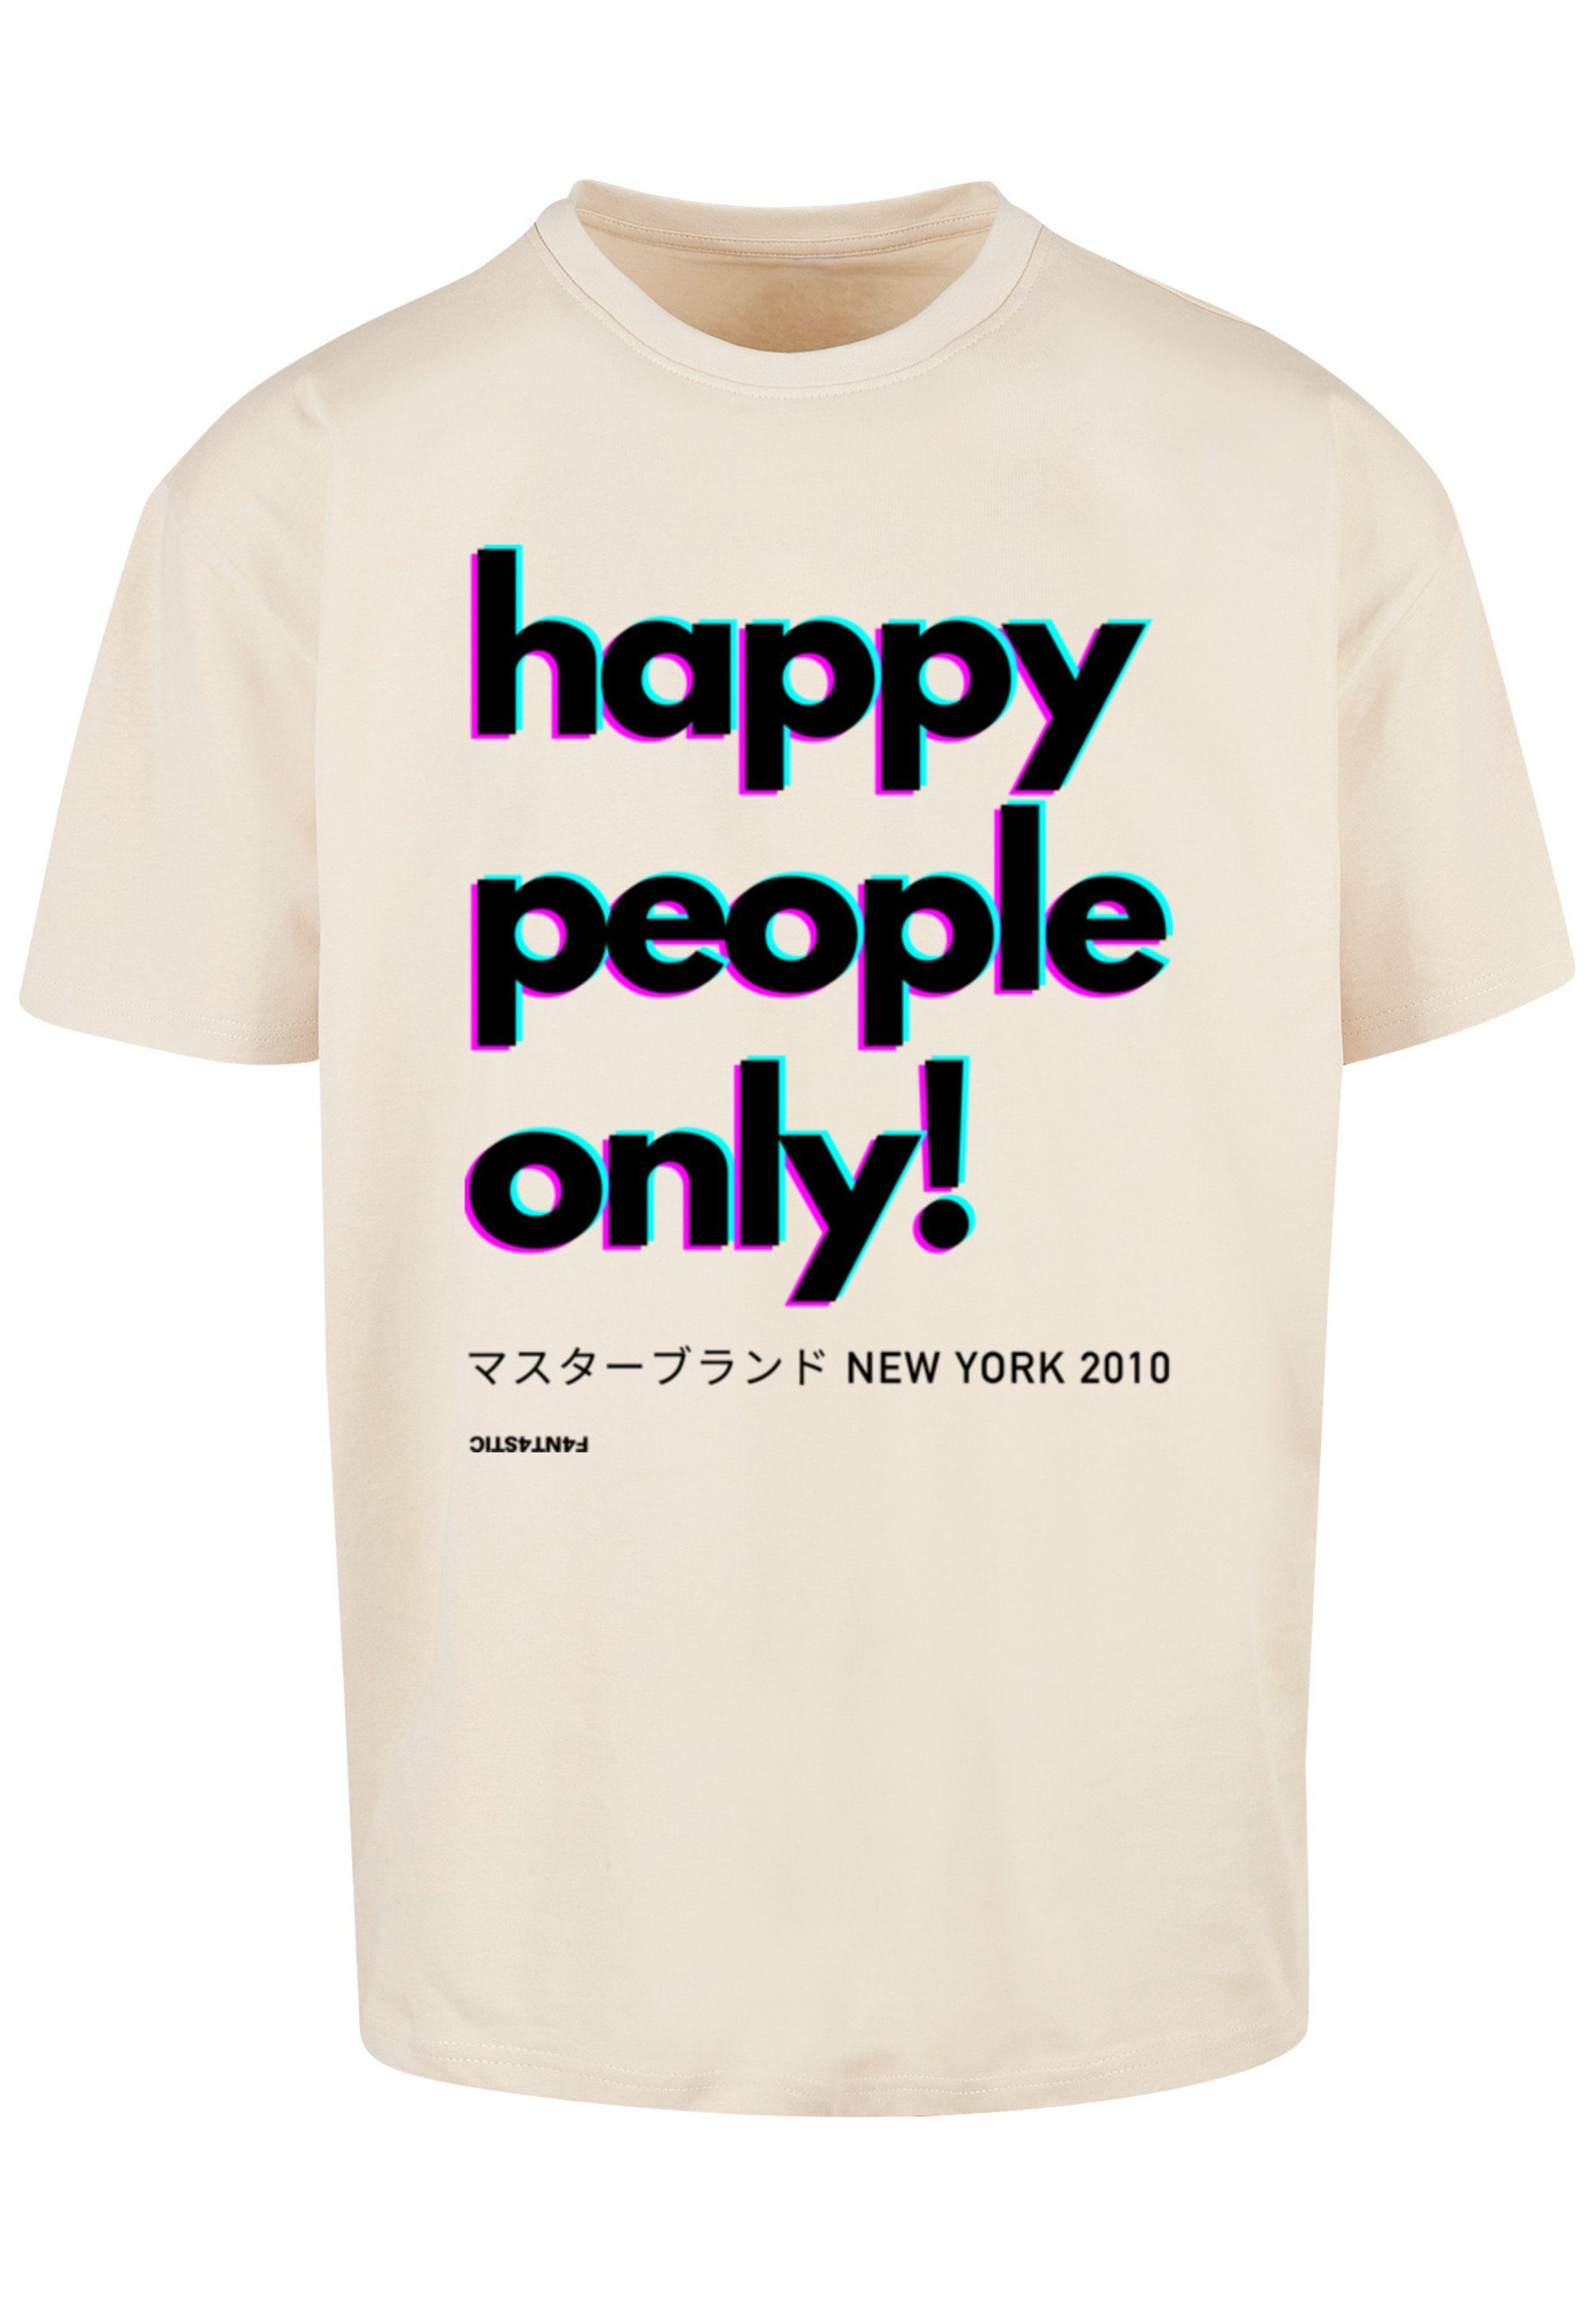 T-Shirt only York F4NT4STIC Print Happy sand people New